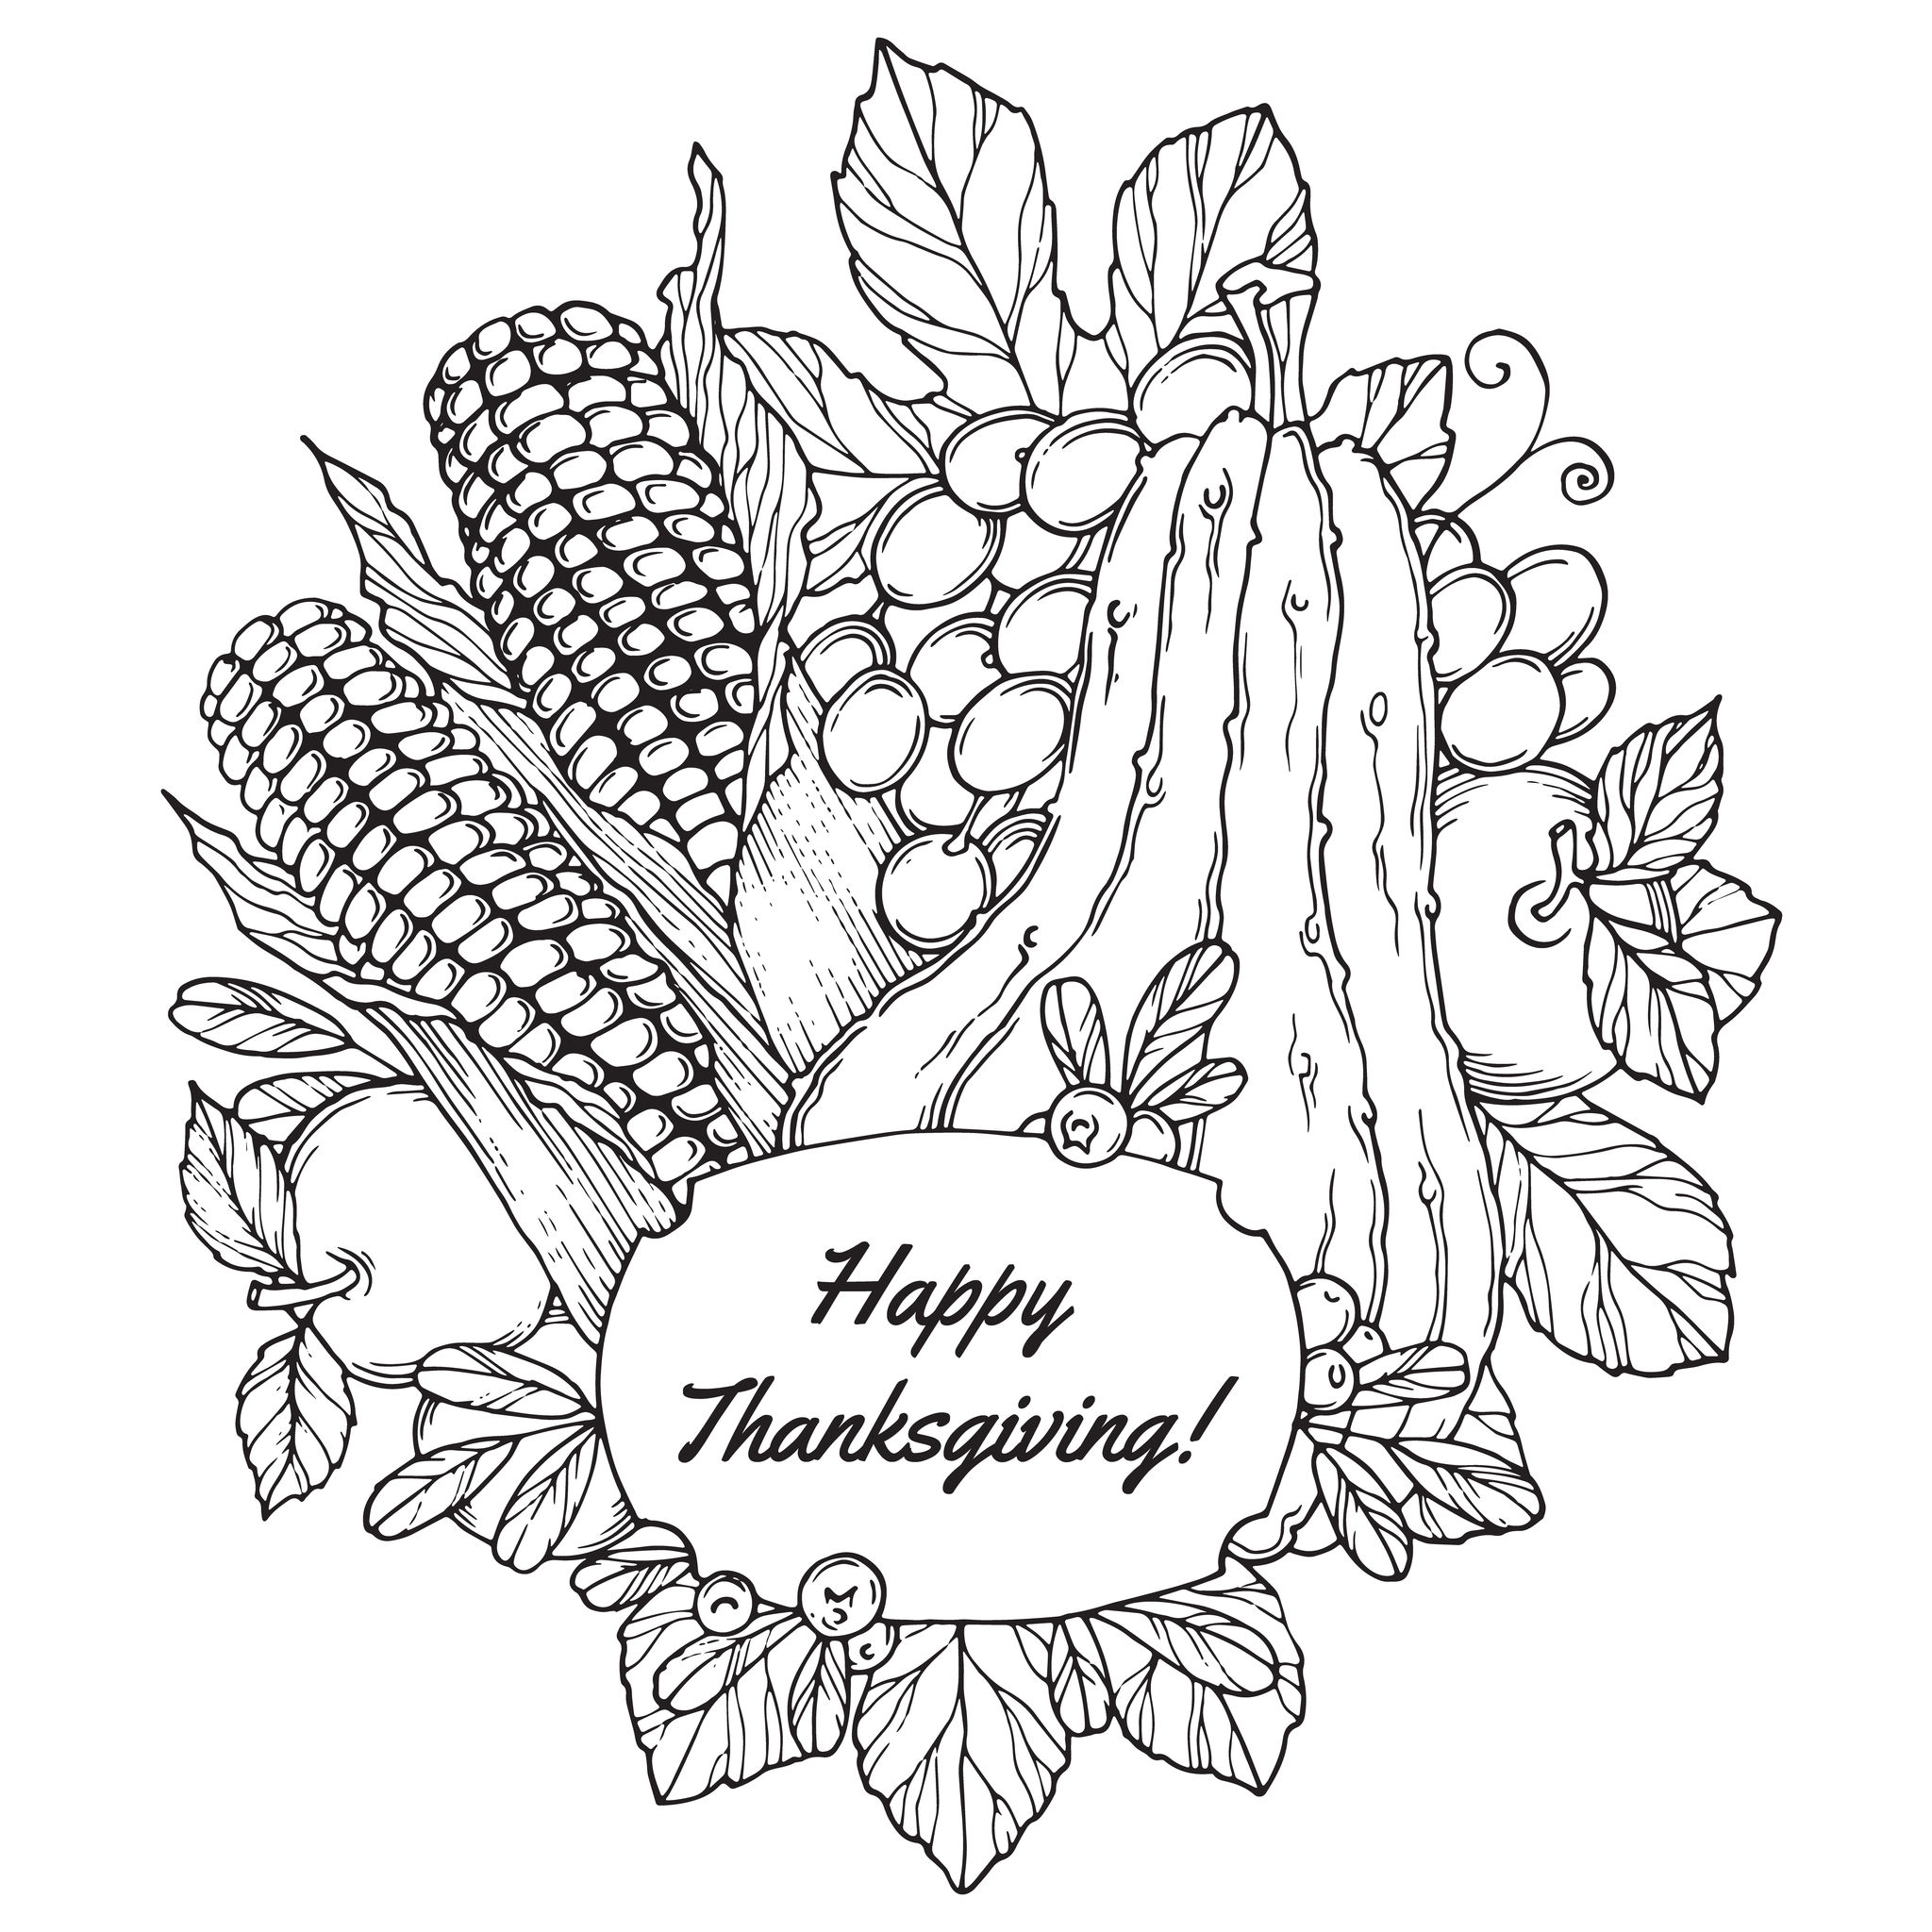 Coloring page to color in October with berries, vegetables and various fruits ... Happy Thanksgiving !